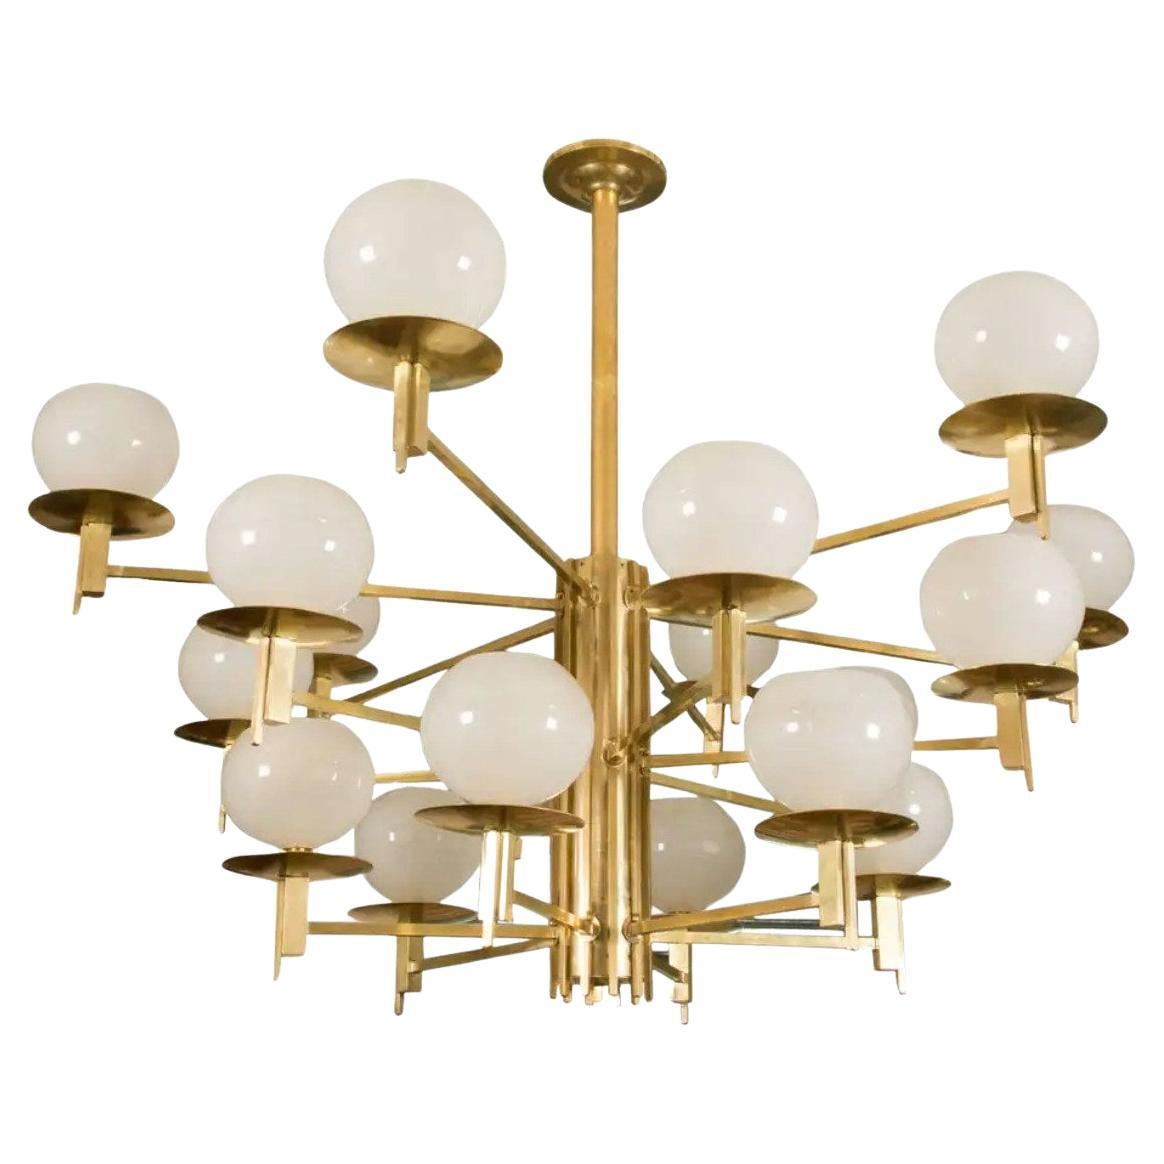 Brass Chandelier at cost price. For Sale